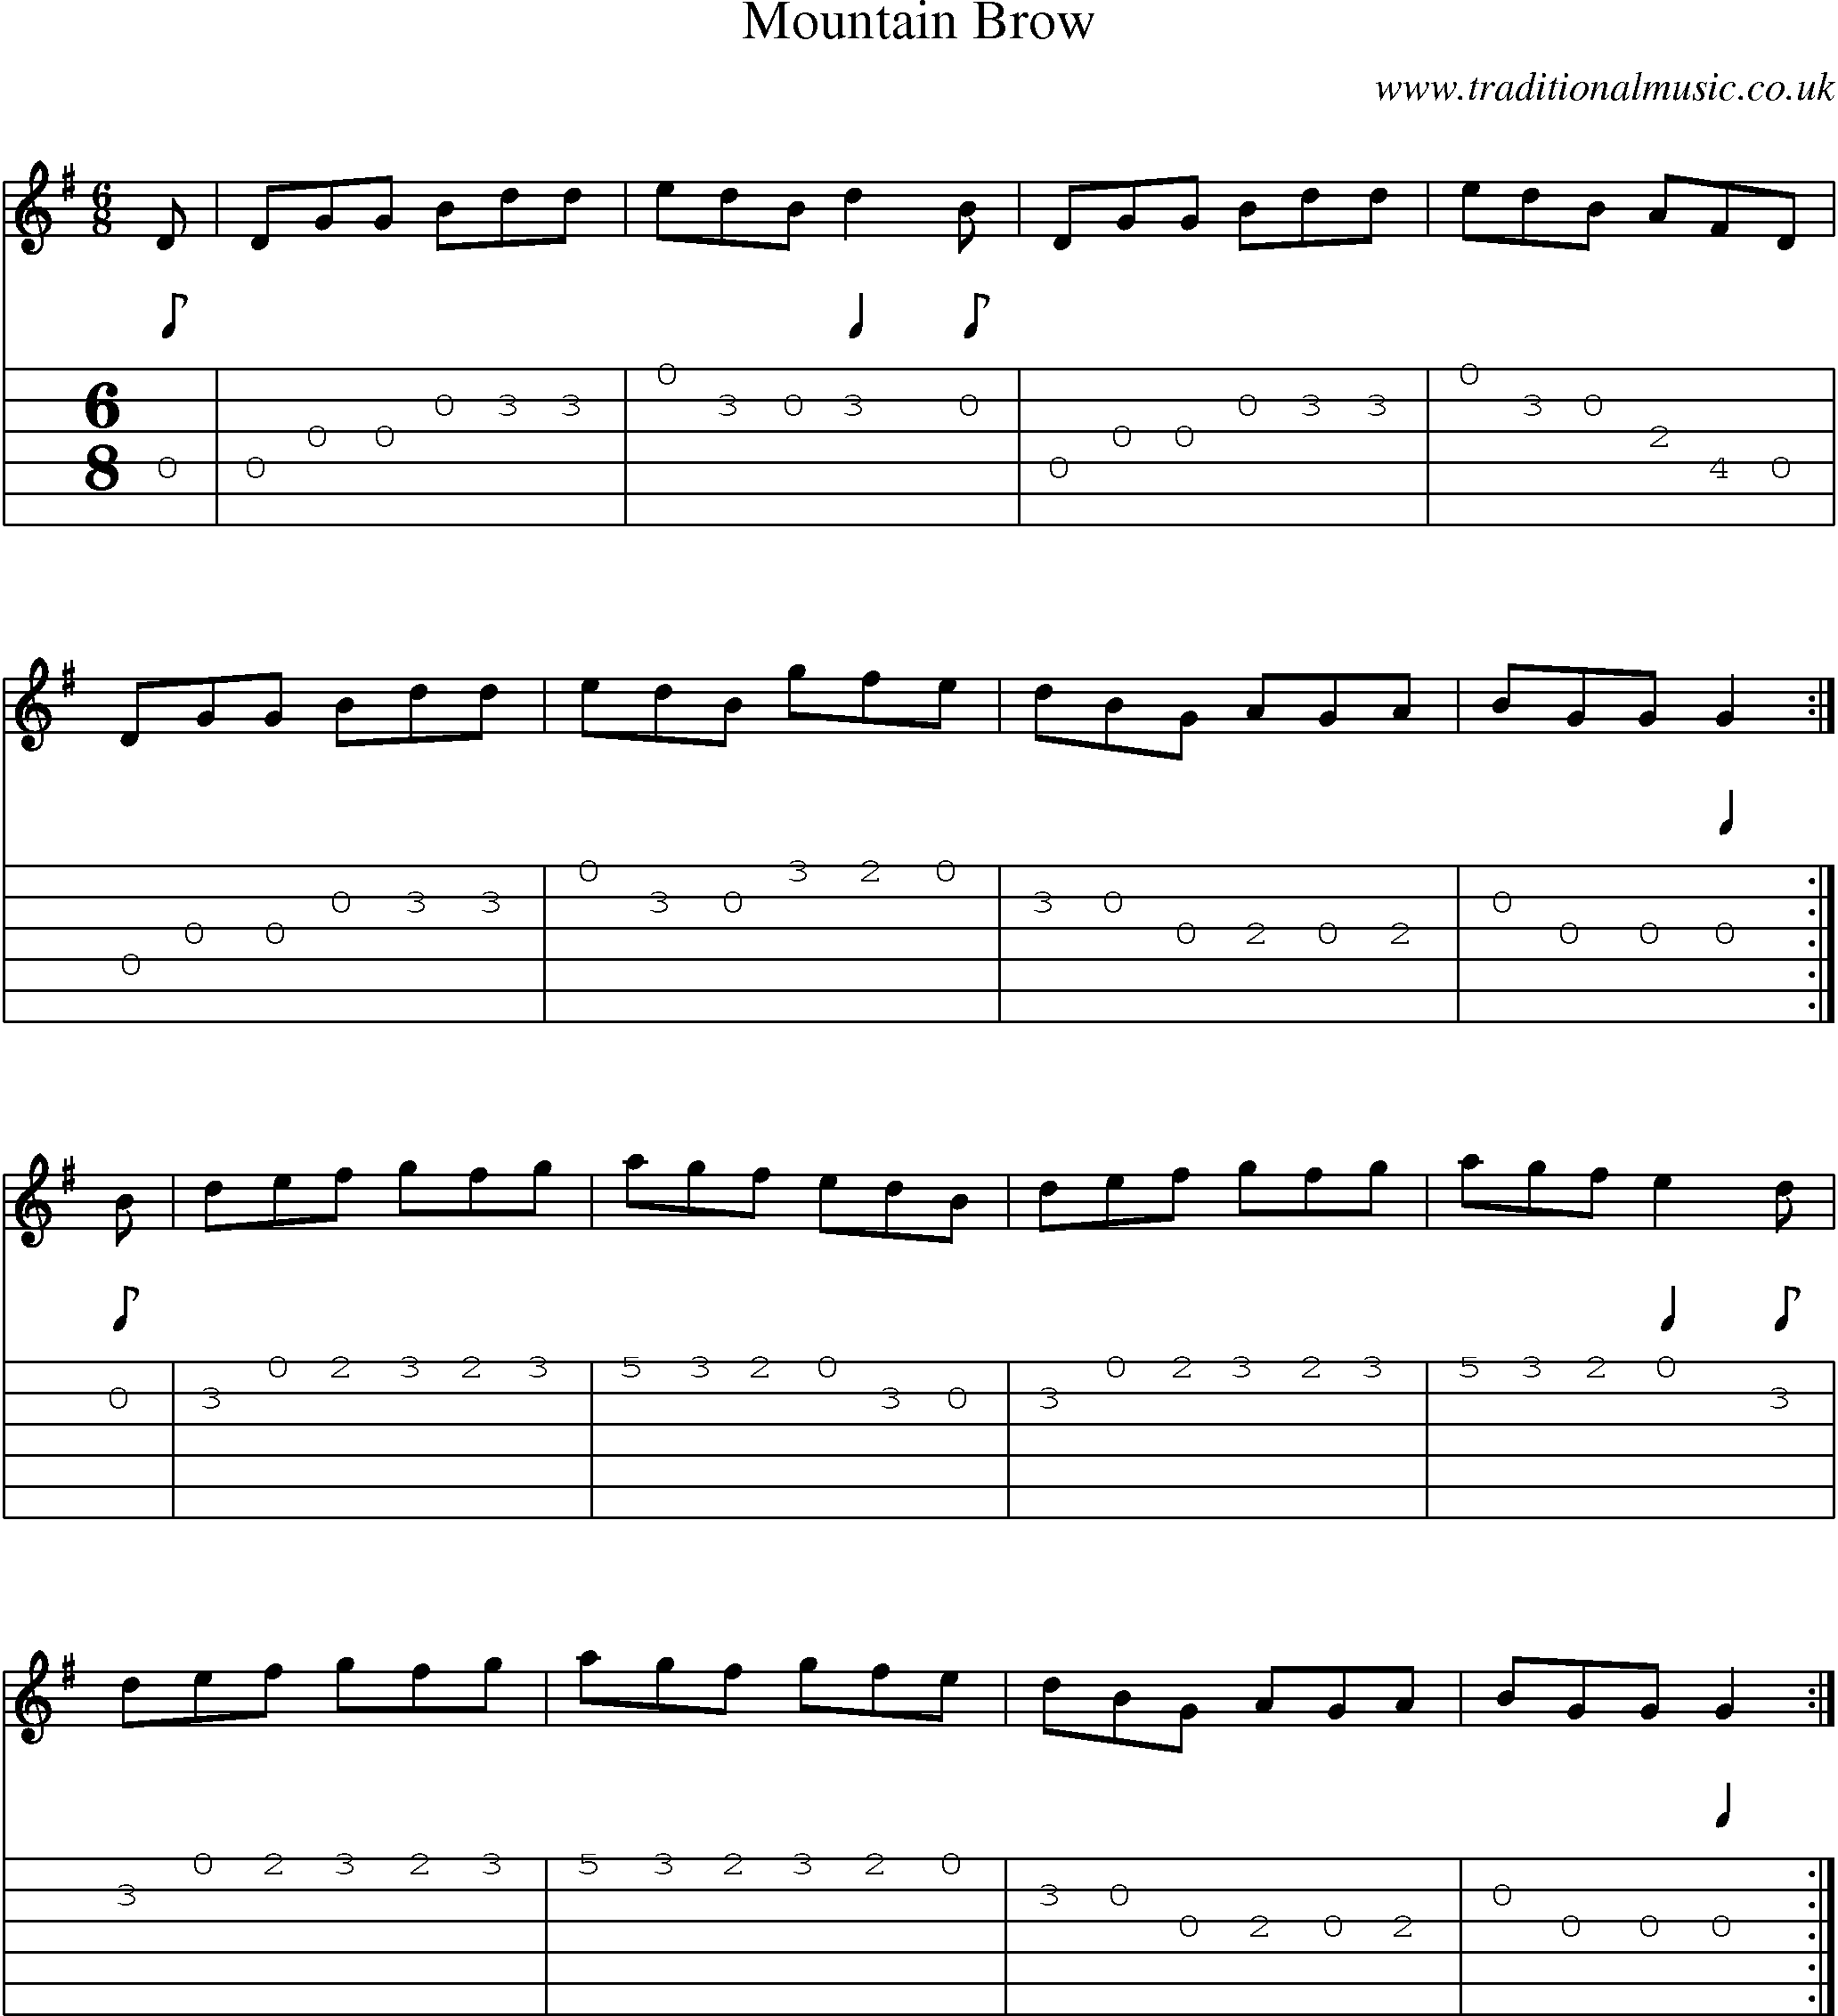 Music Score and Guitar Tabs for Mountain Brow